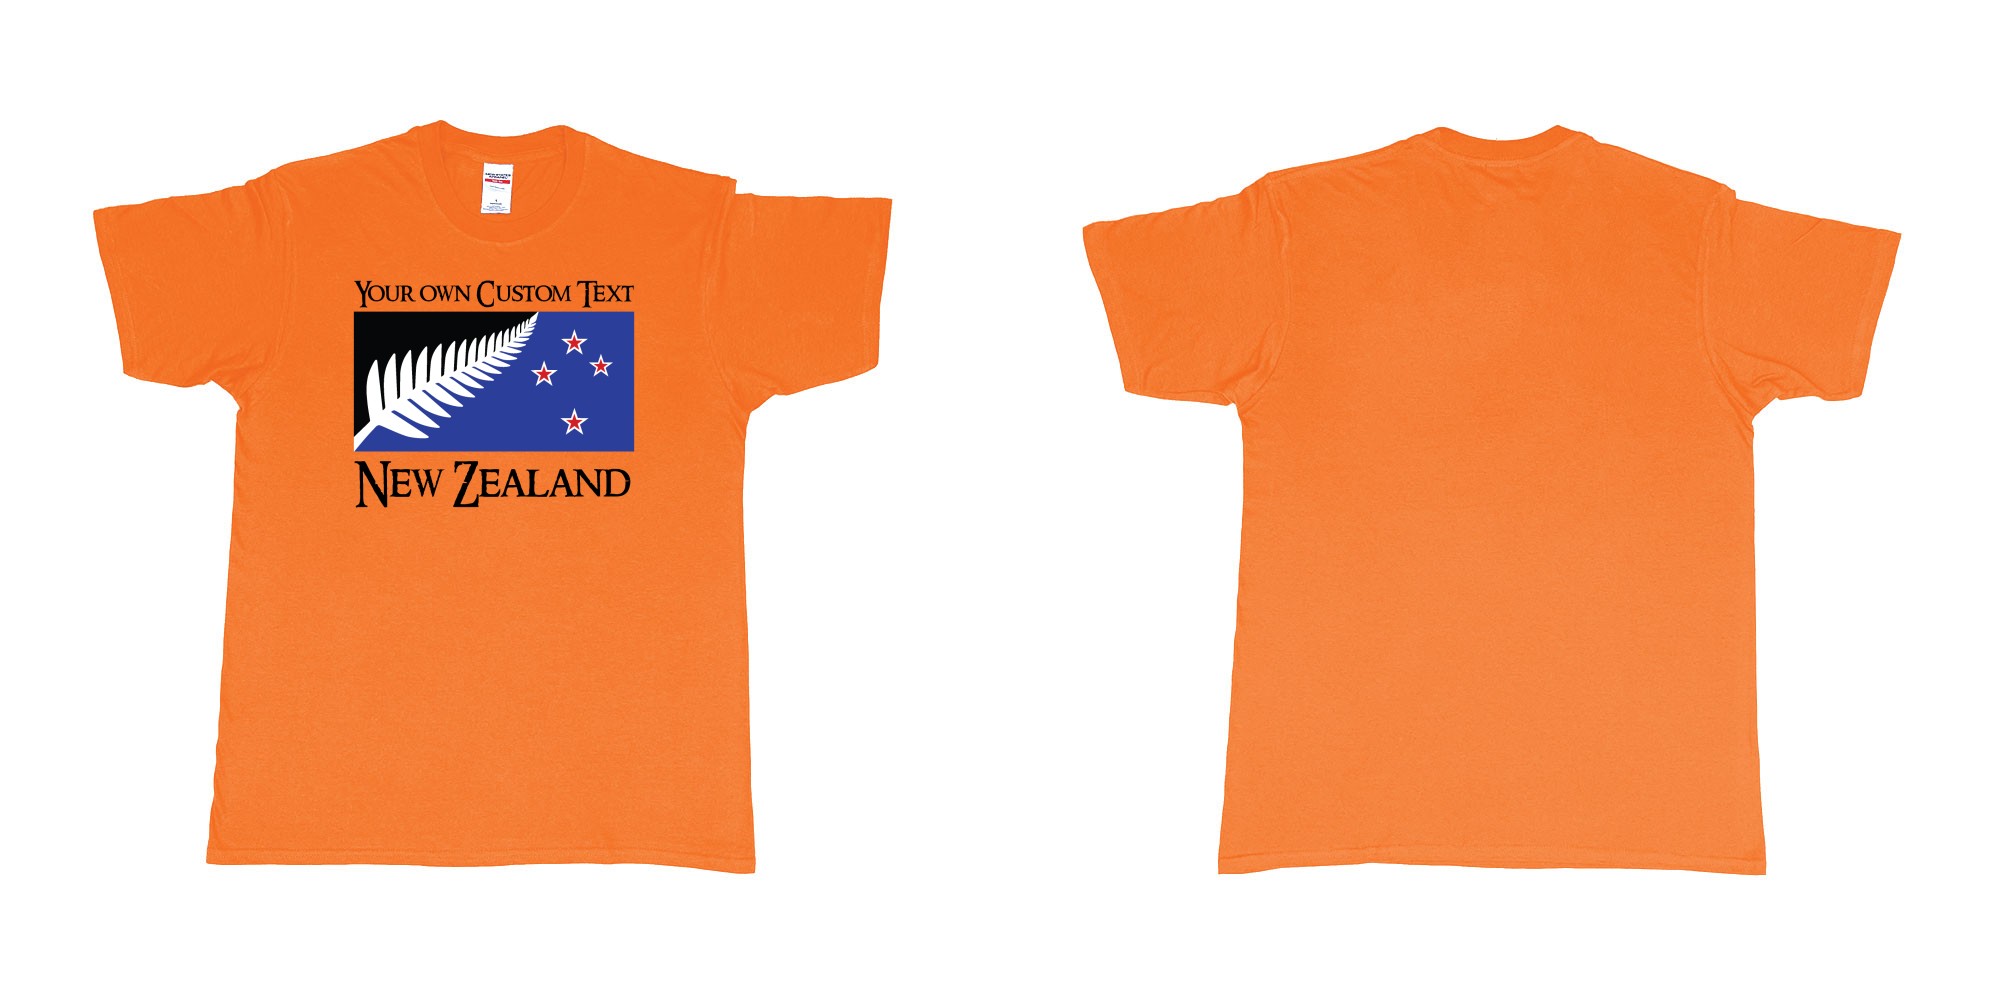 Custom tshirt design new zealand silver fern flag in fabric color orange choice your own text made in Bali by The Pirate Way